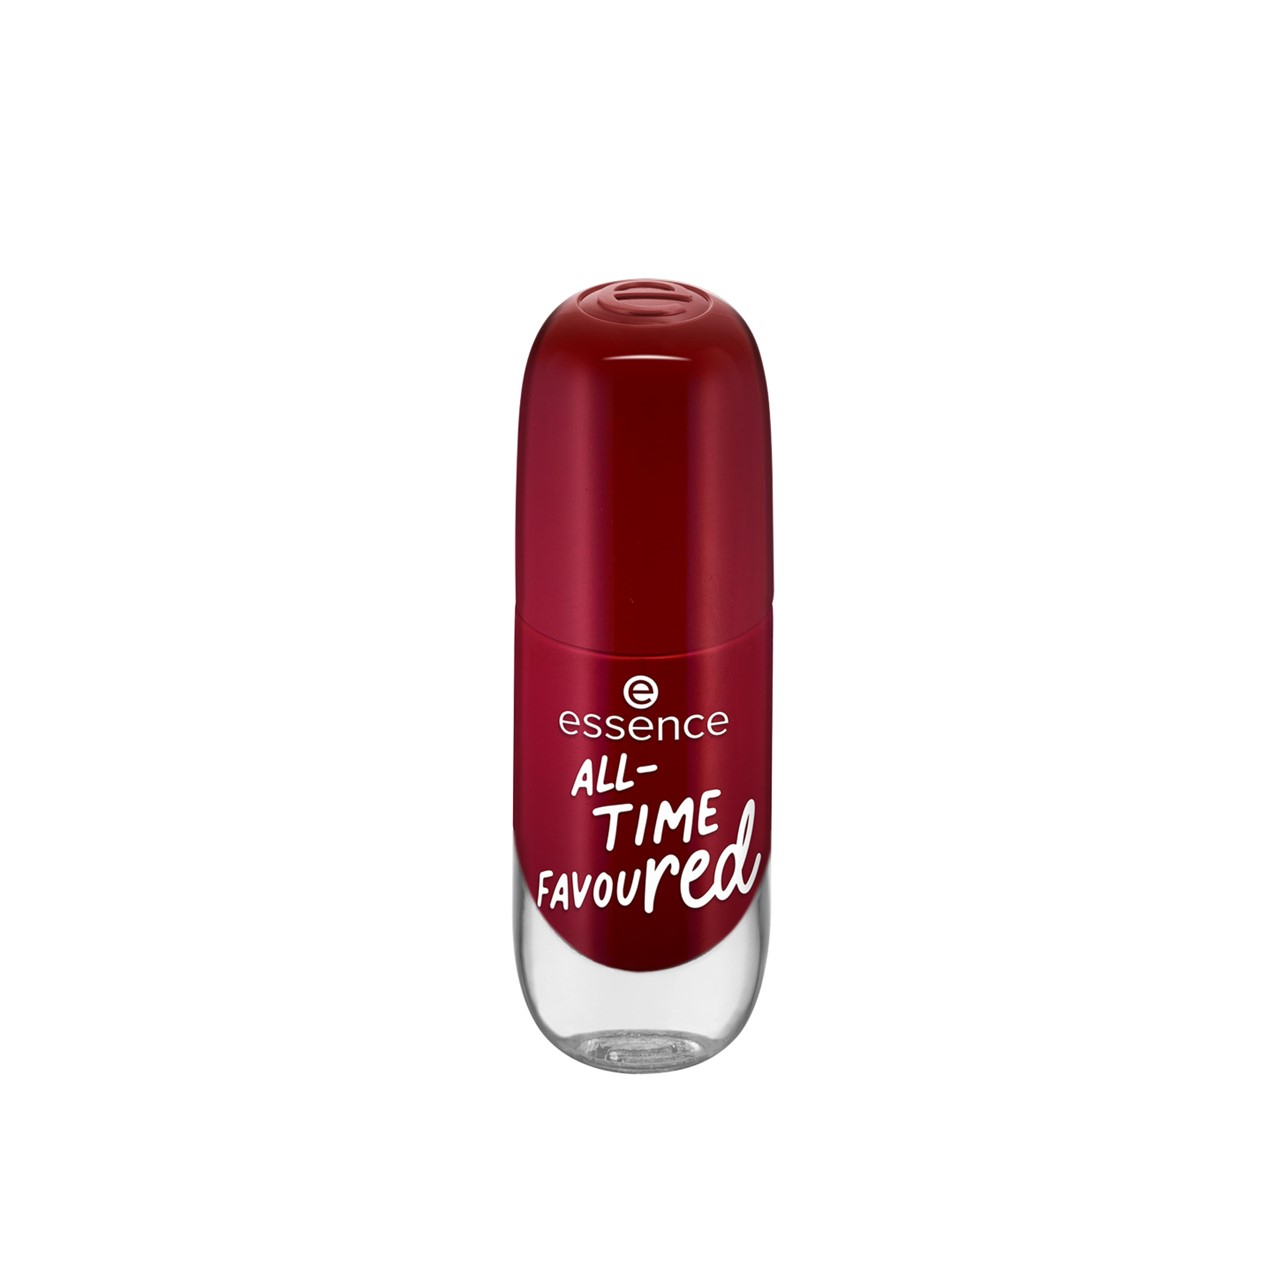 essence Gel Nail Colour 14 All-Time FavouRed 8ml